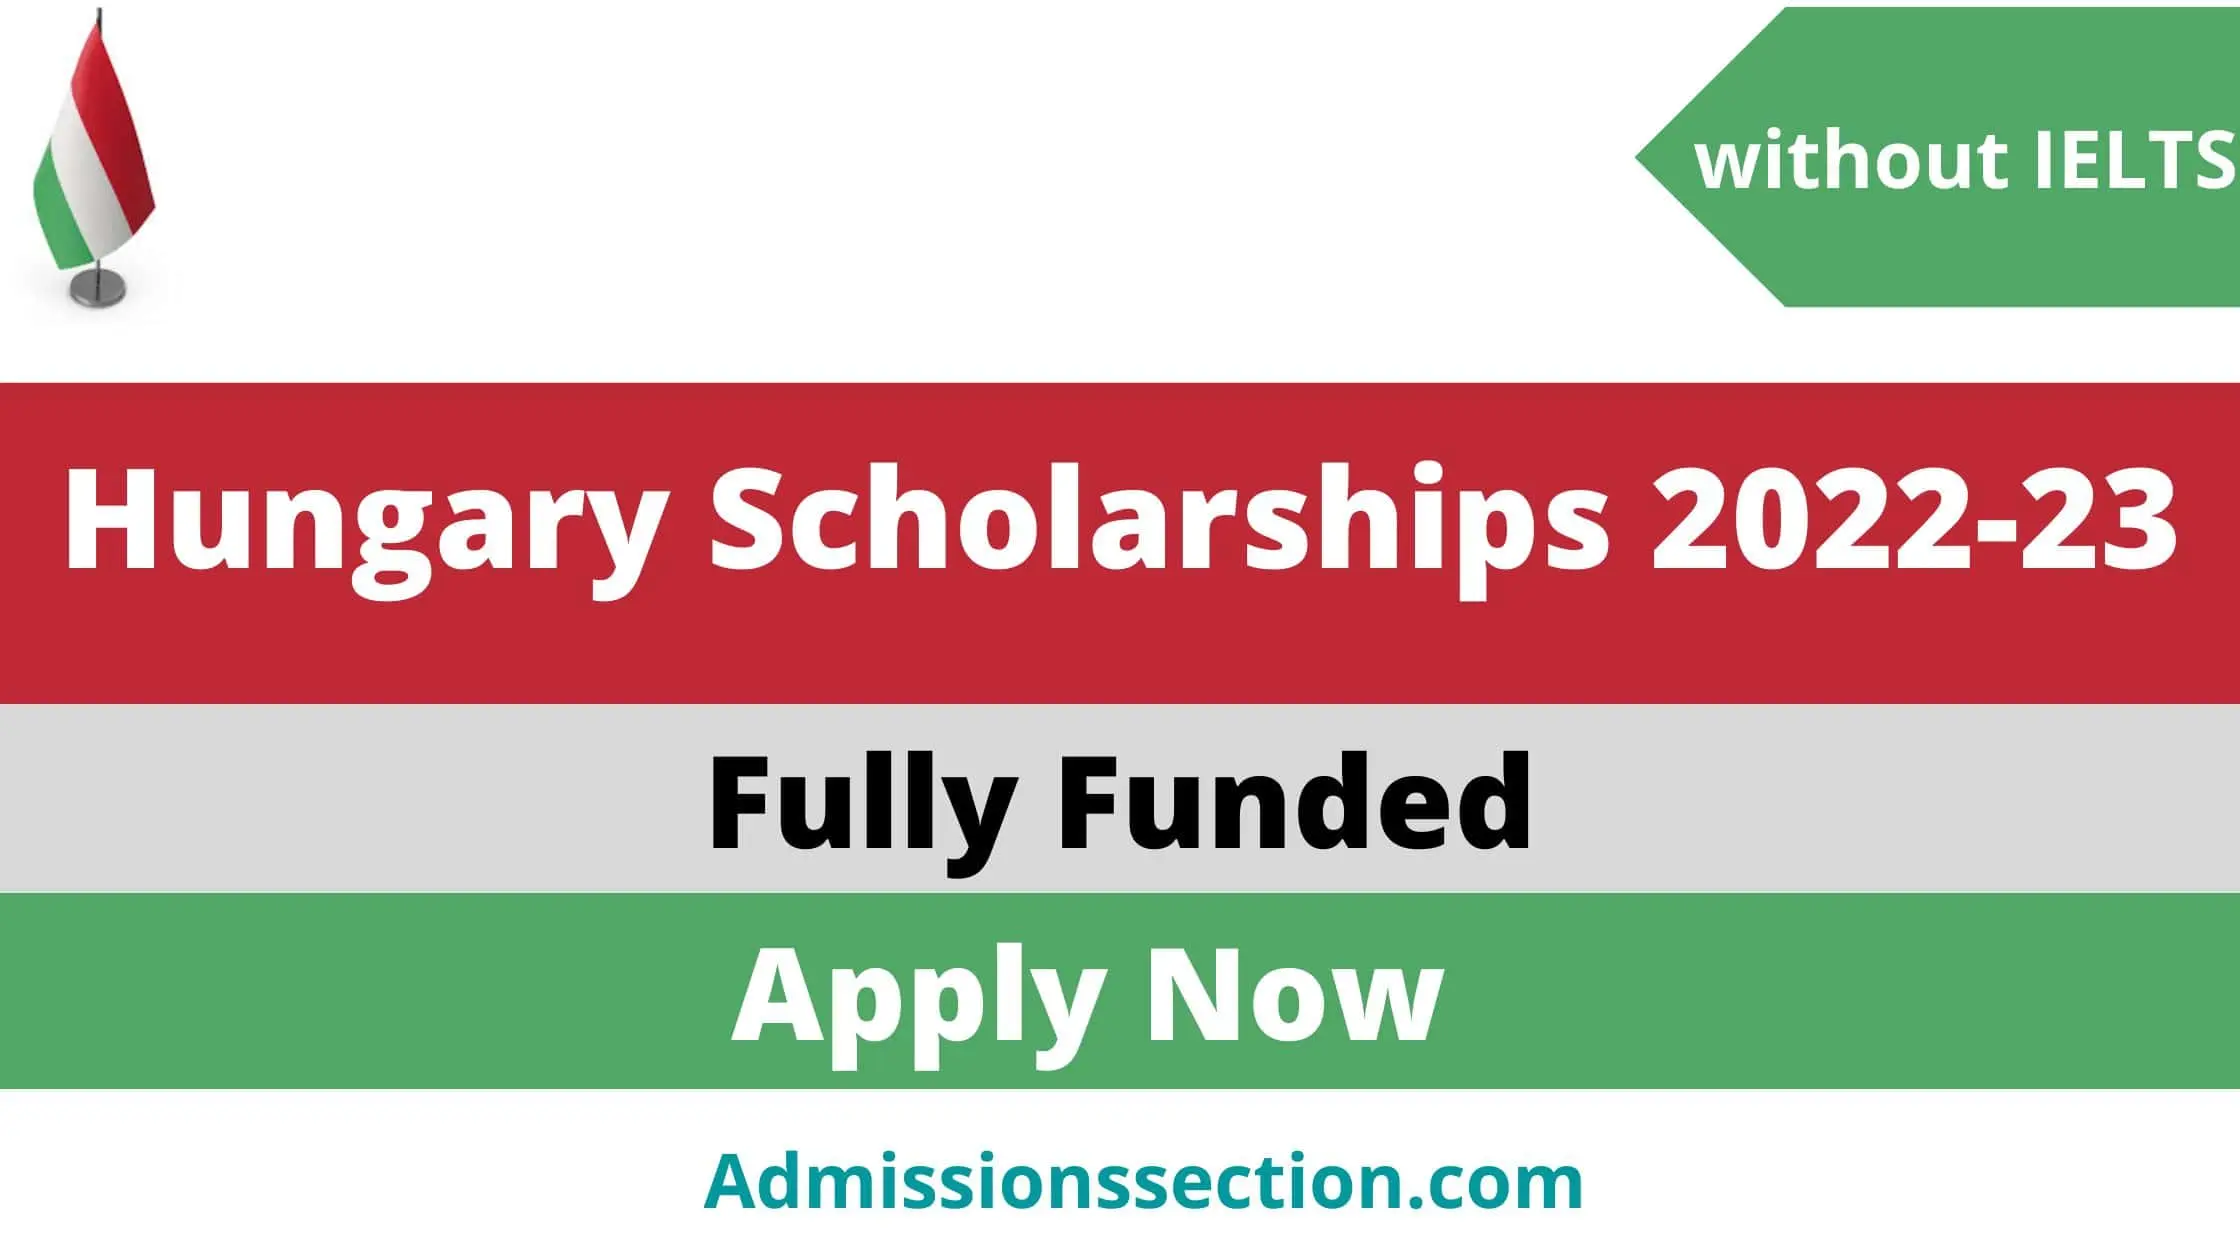 Hungary Scholarships without IELTS 2022-23